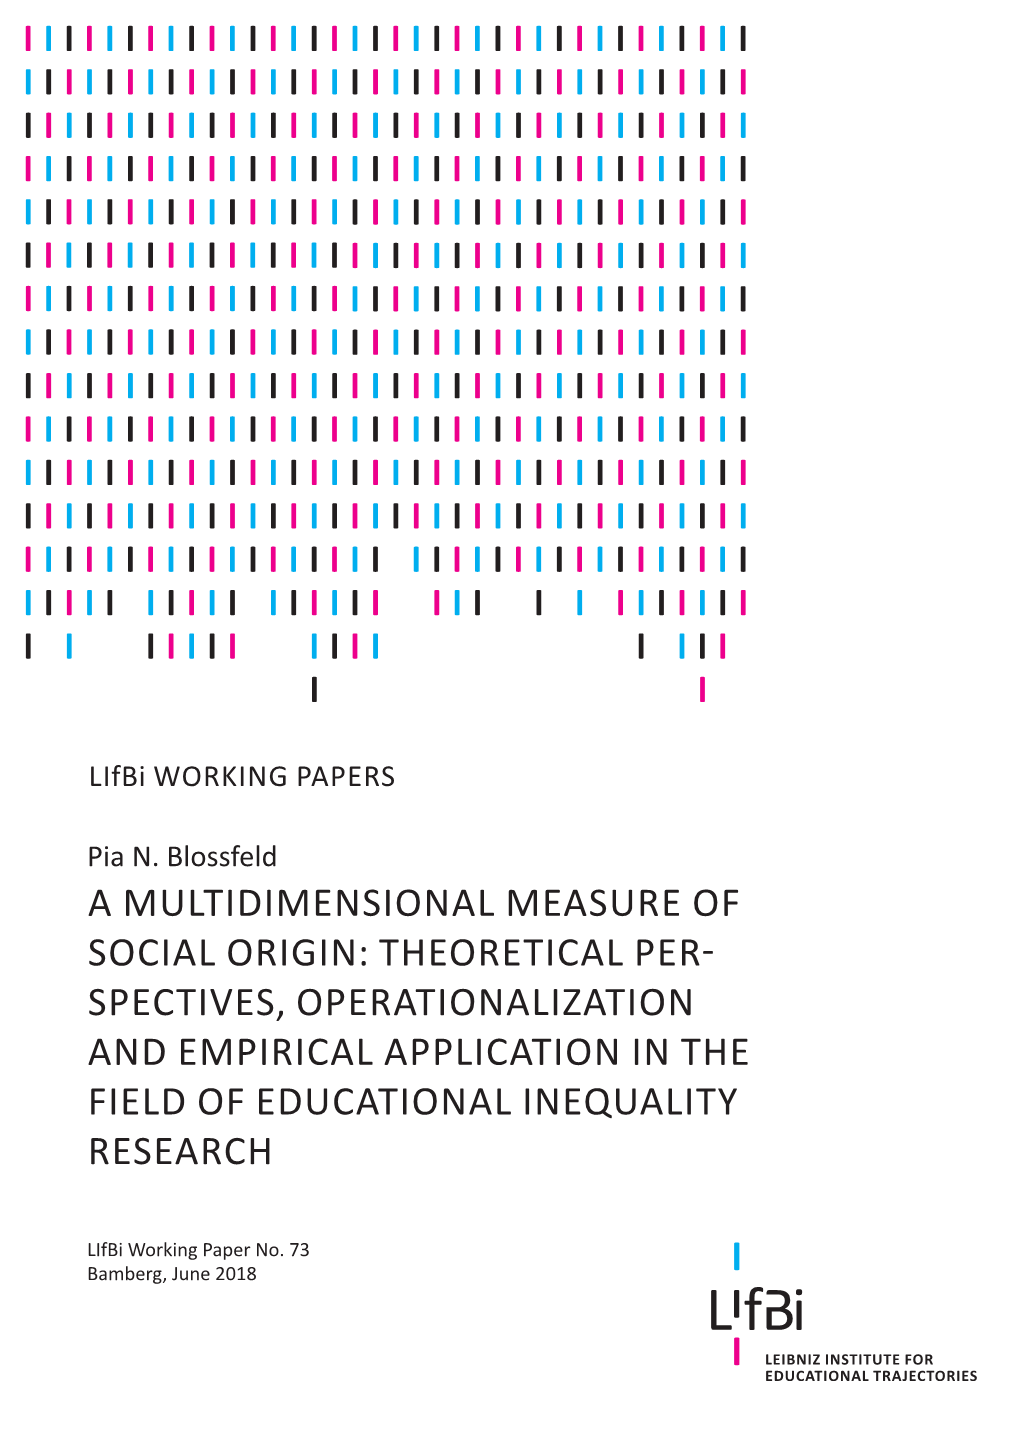 A Multidimensional Measure of Social Origin: Theoretical Per- Spectives, Operationalization and Empirical Application in the Field of Educational Inequality Research